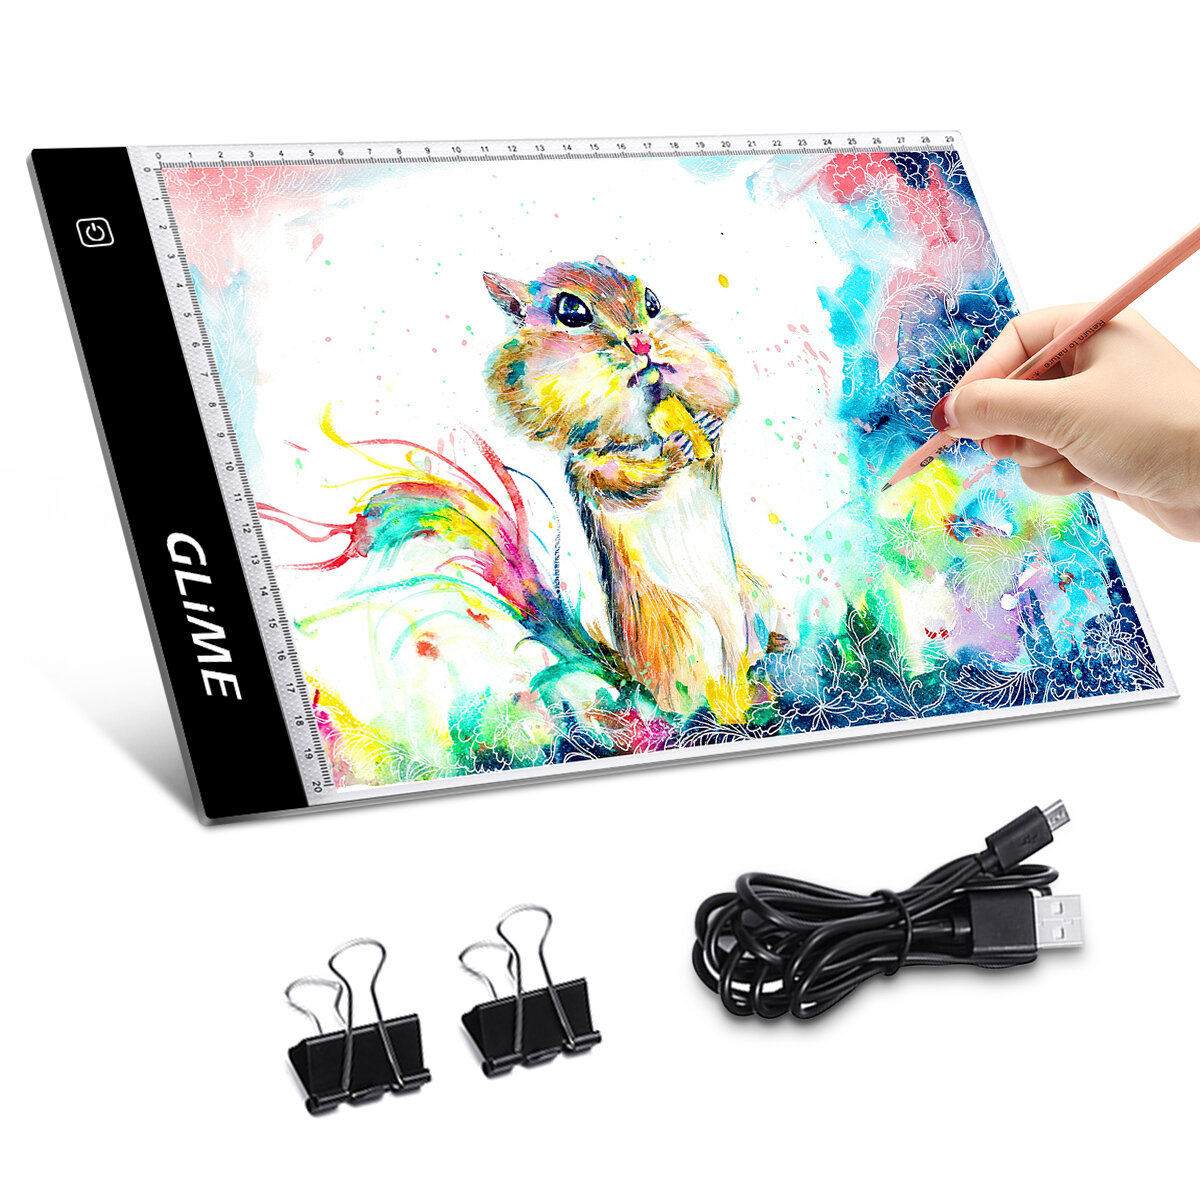 

GLIME A4 Tracing Copy Board Graphics Tablet LED Light Box Digital Sketch Drawing Board Painting Writing Tablet